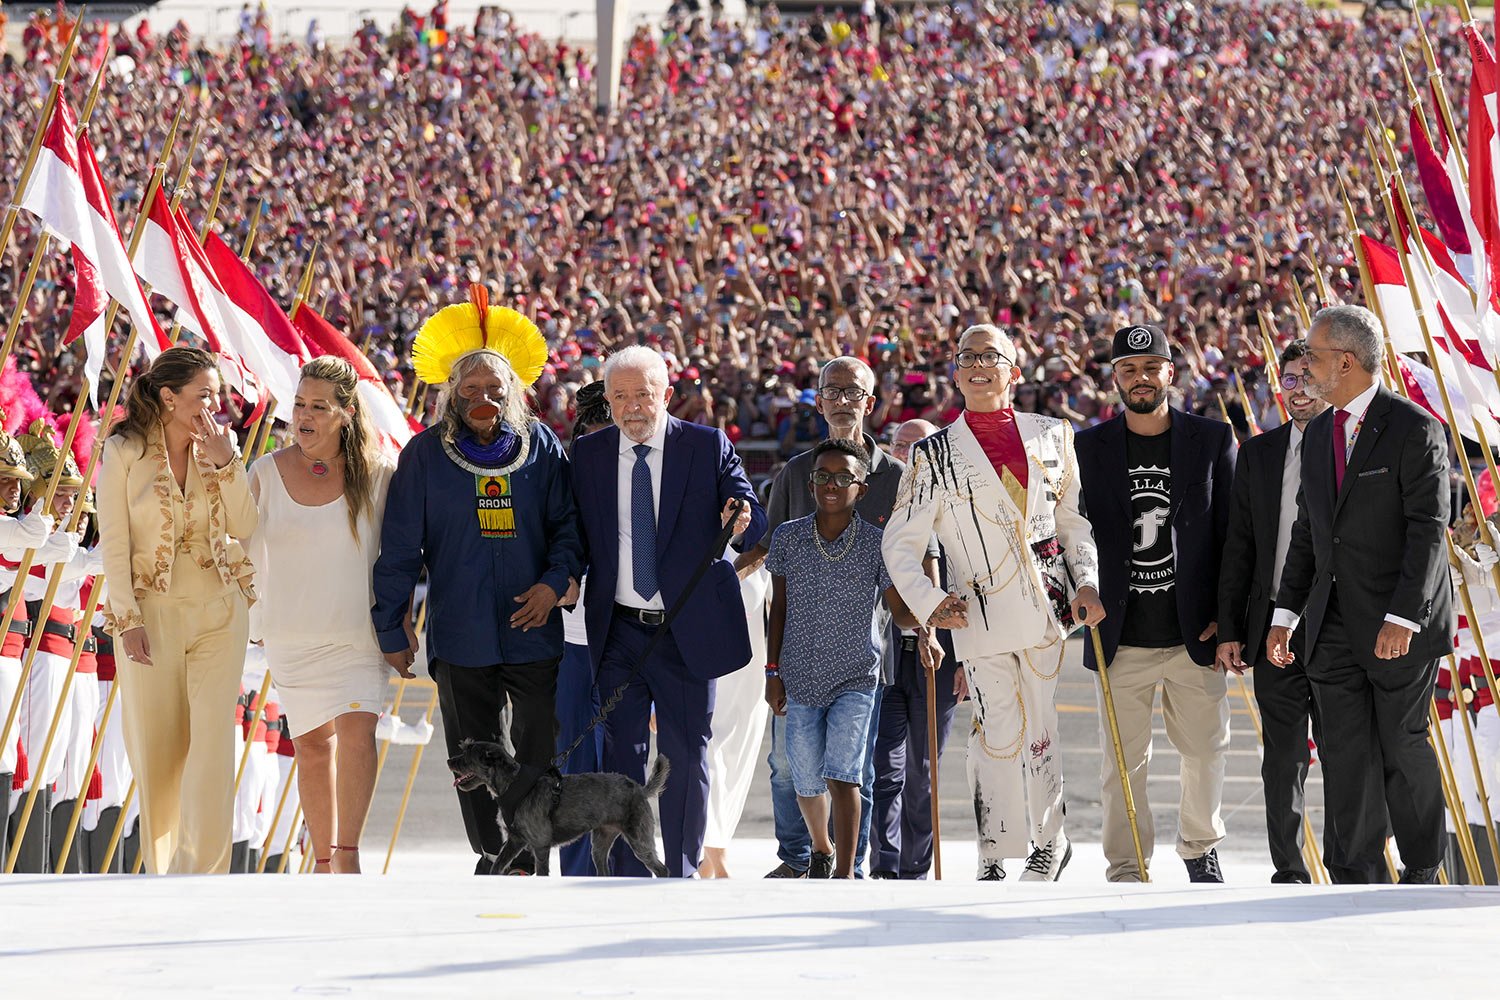  President Luiz Inacio Lula da Silva arrives to Planalto Palace with a group representing diverse segments of society after he was sworn-in on his Inauguration Day in Brasilia, Brazil, Jan. 1, 2023. (AP Photo/Eraldo Peres) 